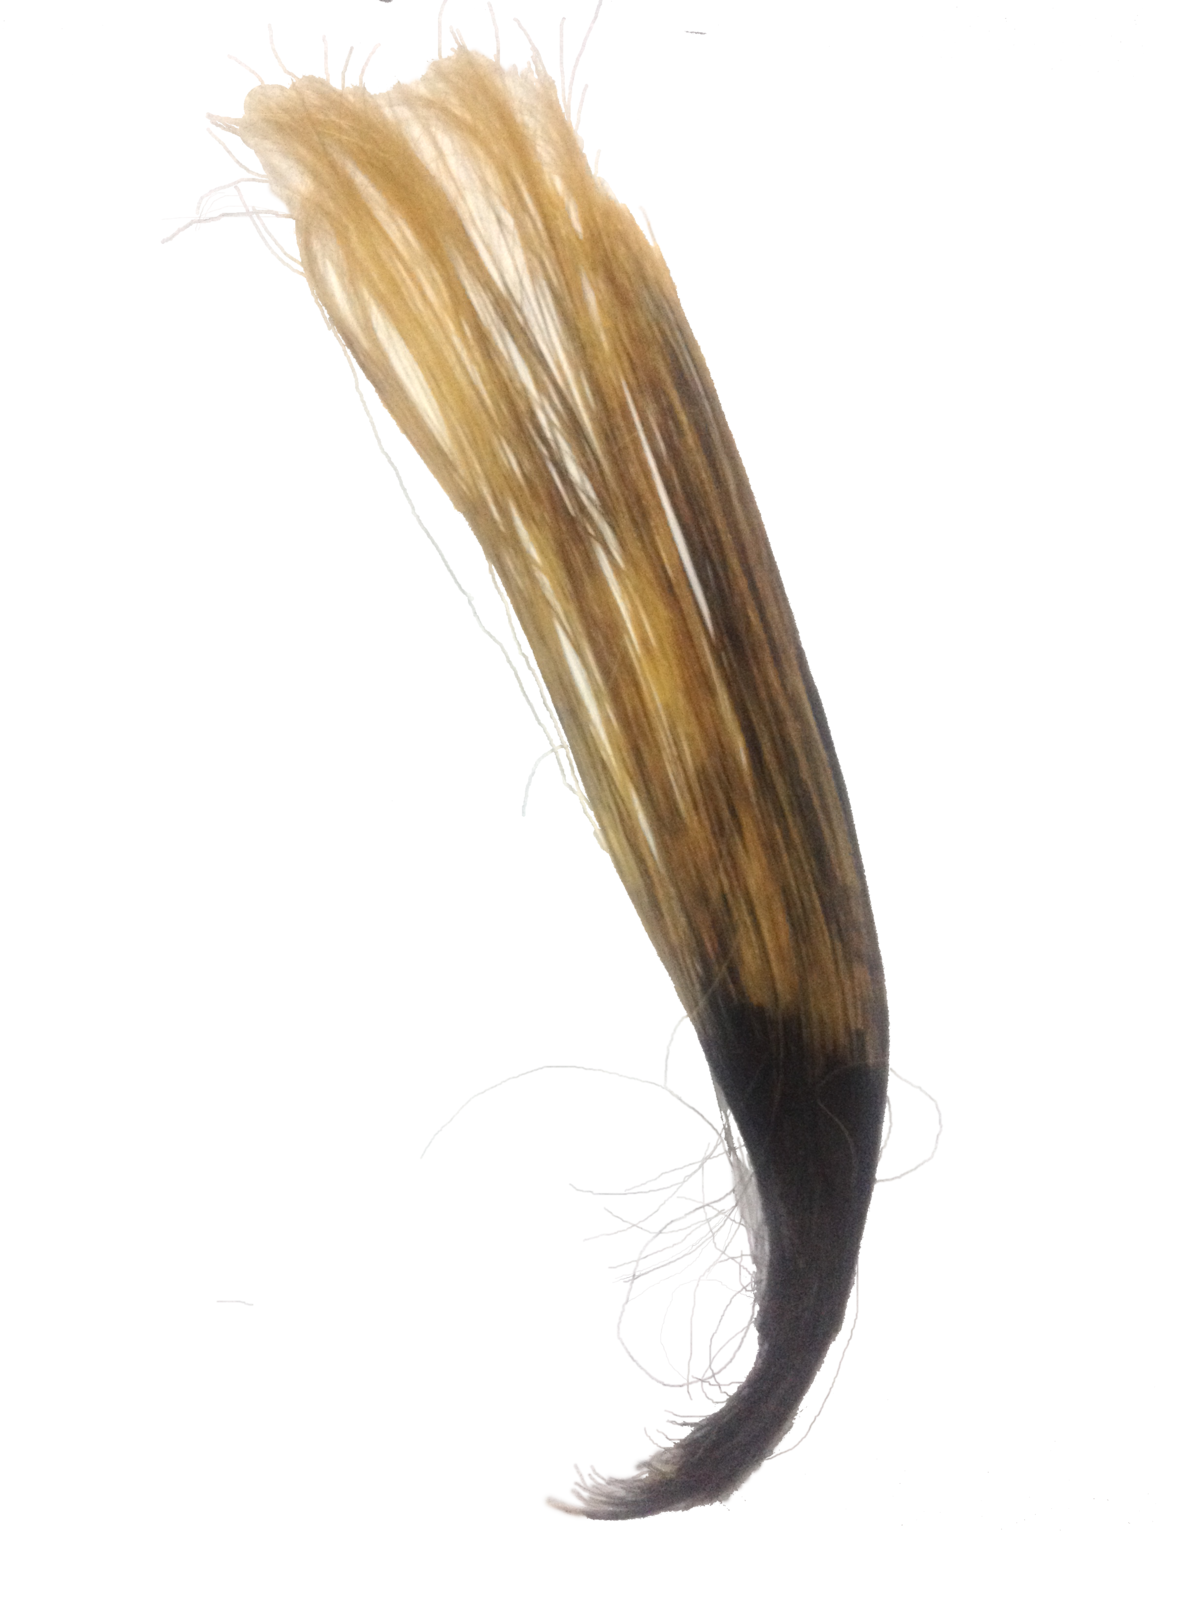 File:Human Hair Partly  - Wikimedia Commons